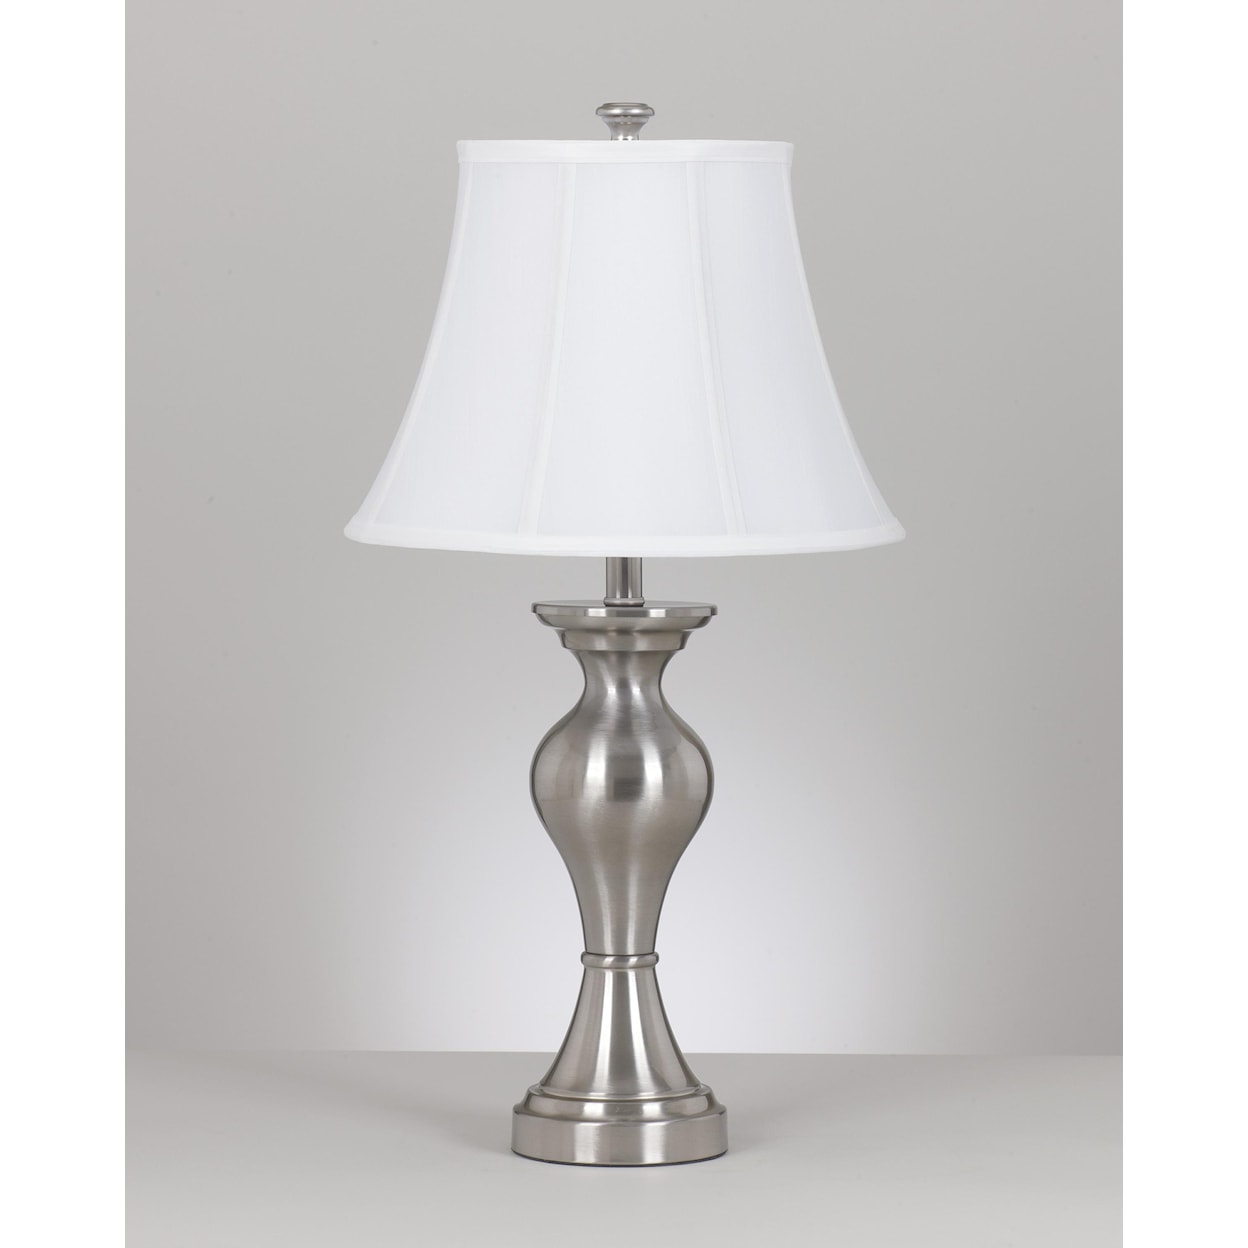 Signature Design by Ashley Lamps - Vintage Style Set of 2 Rishona Metal Table Lamps